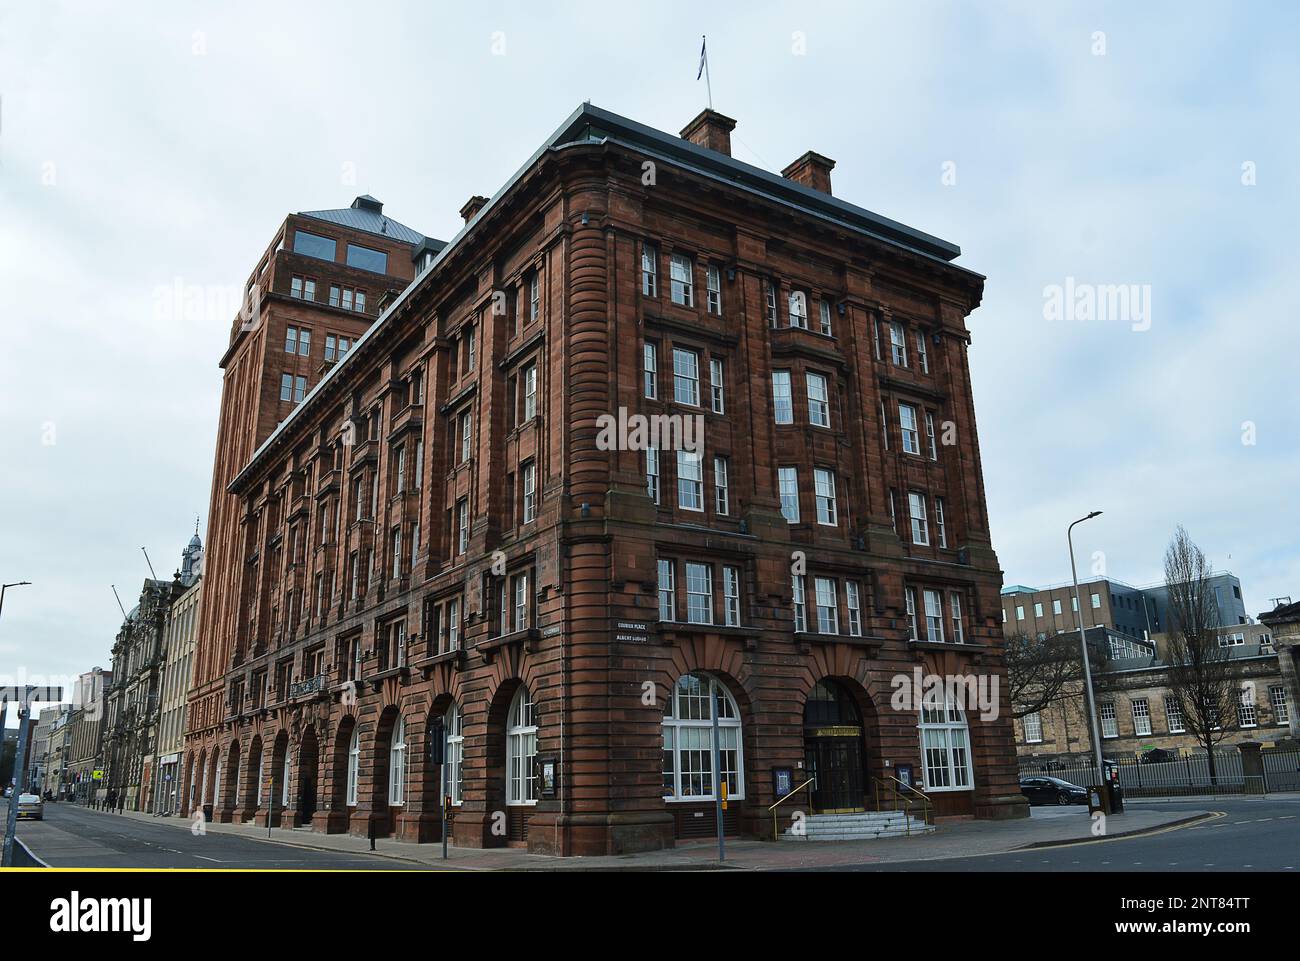 DUNDEE, SCOTLAND - 26 FEBRUARY 2023: The Courier Building, headquarters of publishers D C Thomson & Co, stands on the corner of Meadowside and Albert Stock Photo